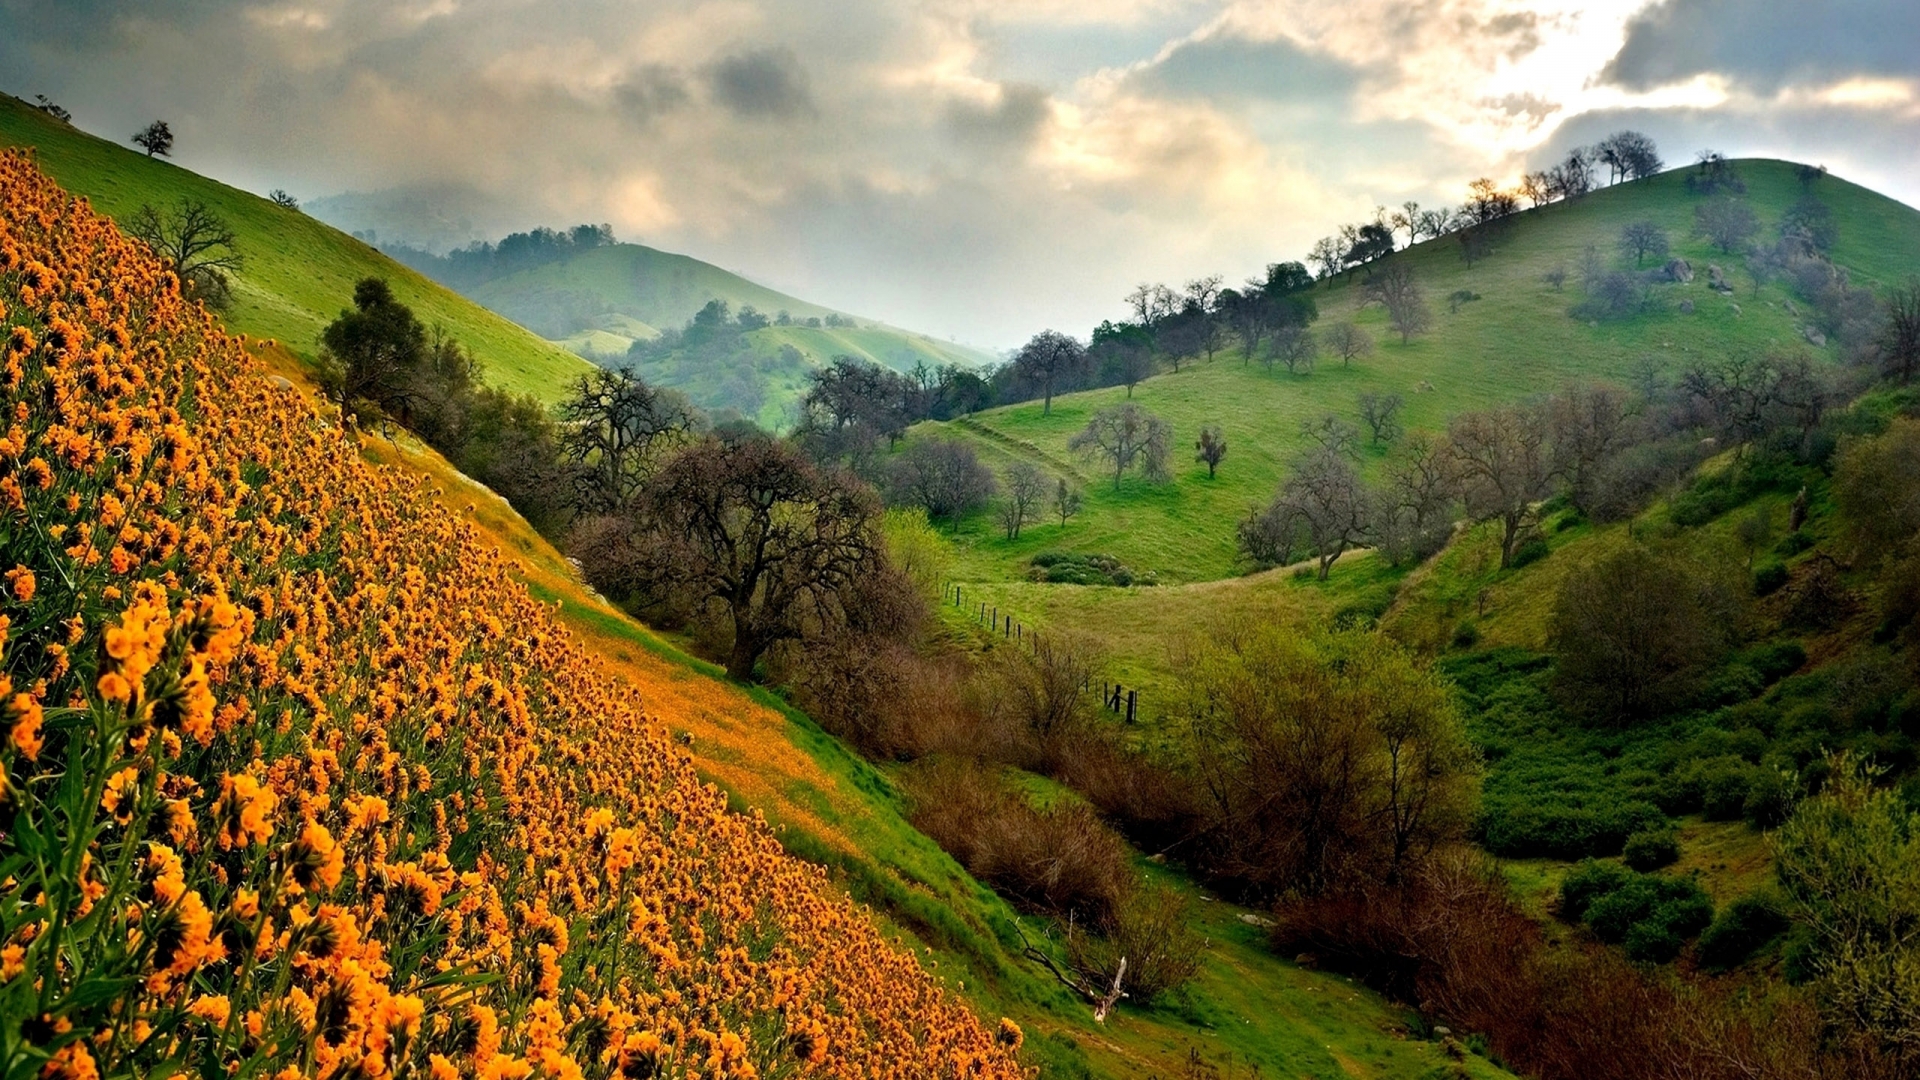 Beautiful Valley Of Flowers Nature Photography #1787 Wallpaper | Dexab